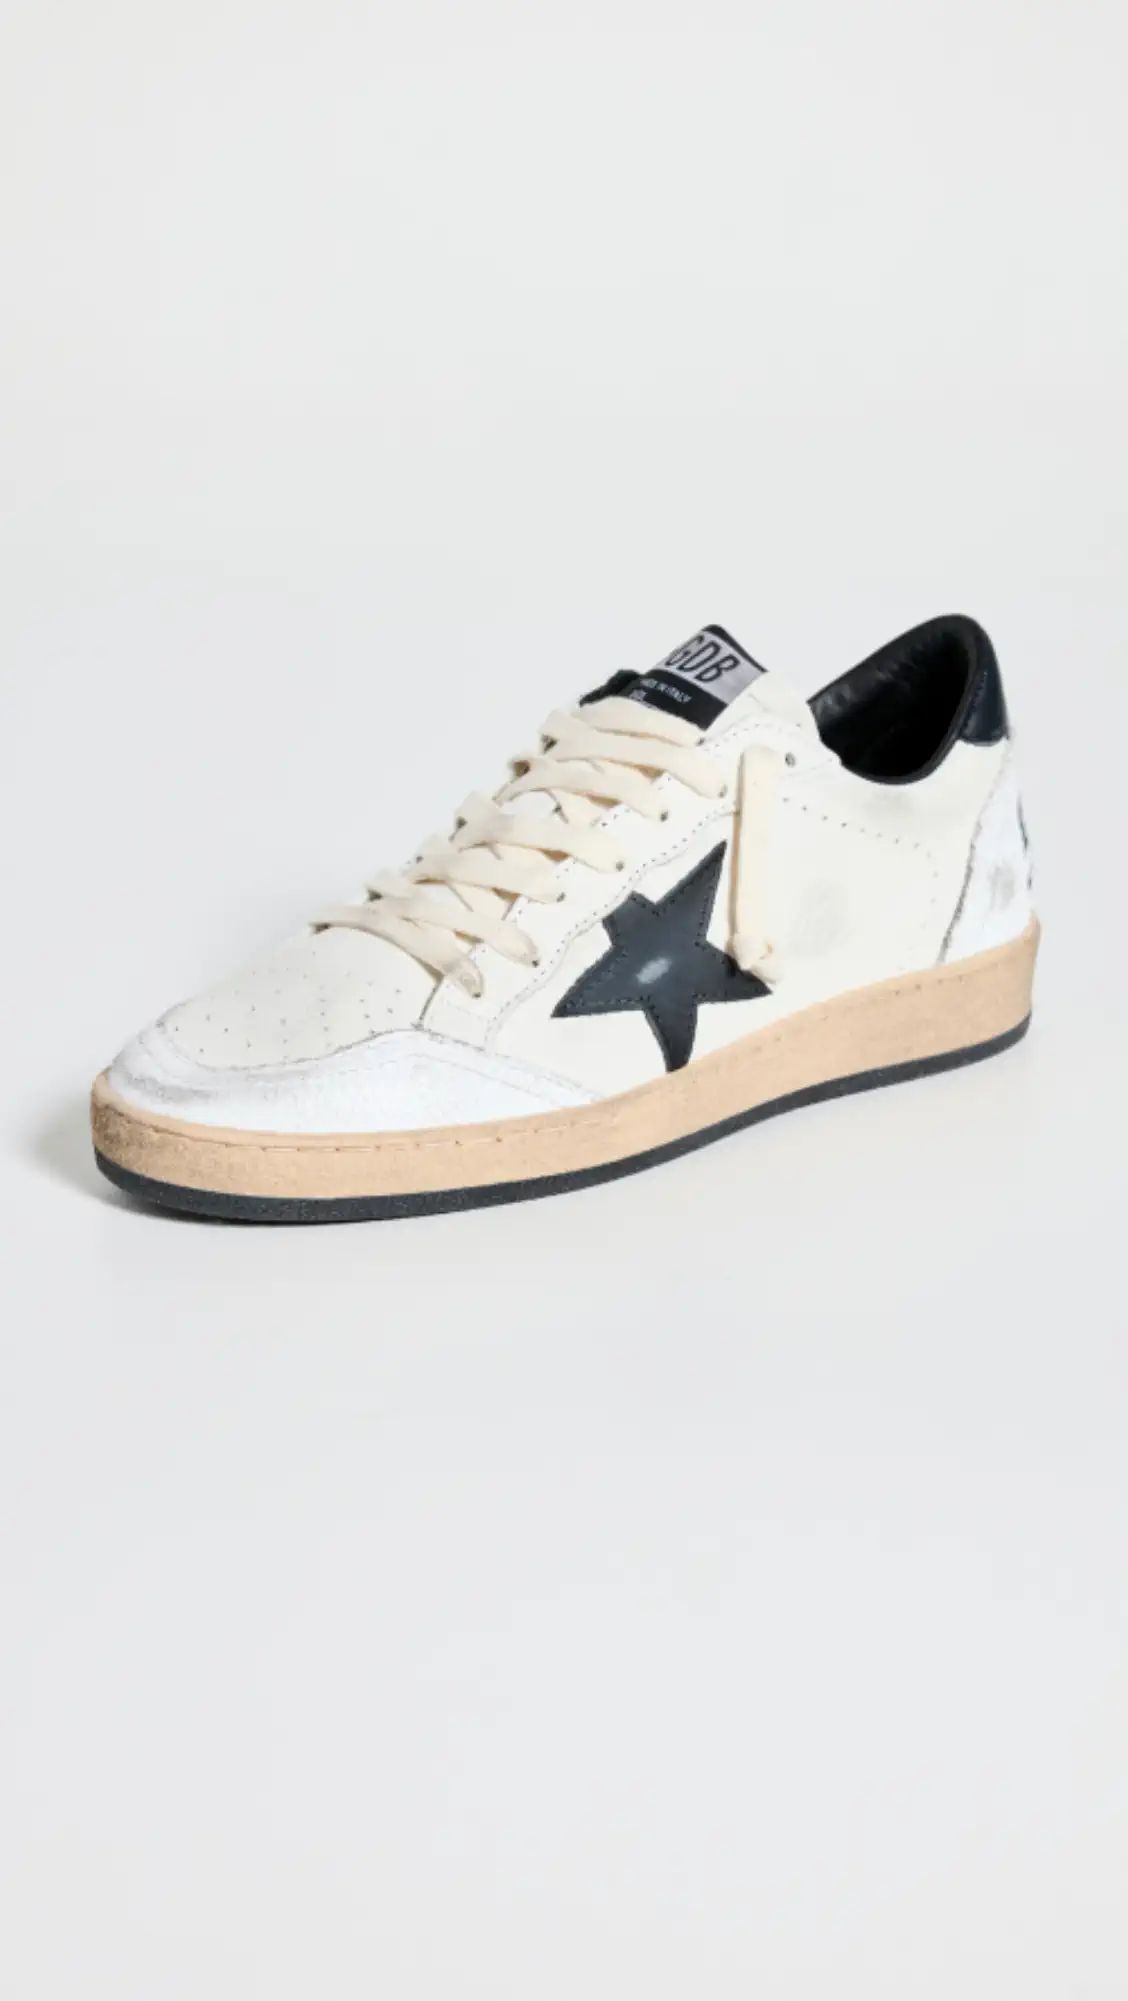 Ball Star Star and Heel Crack Toe Sneakers | Shopbop